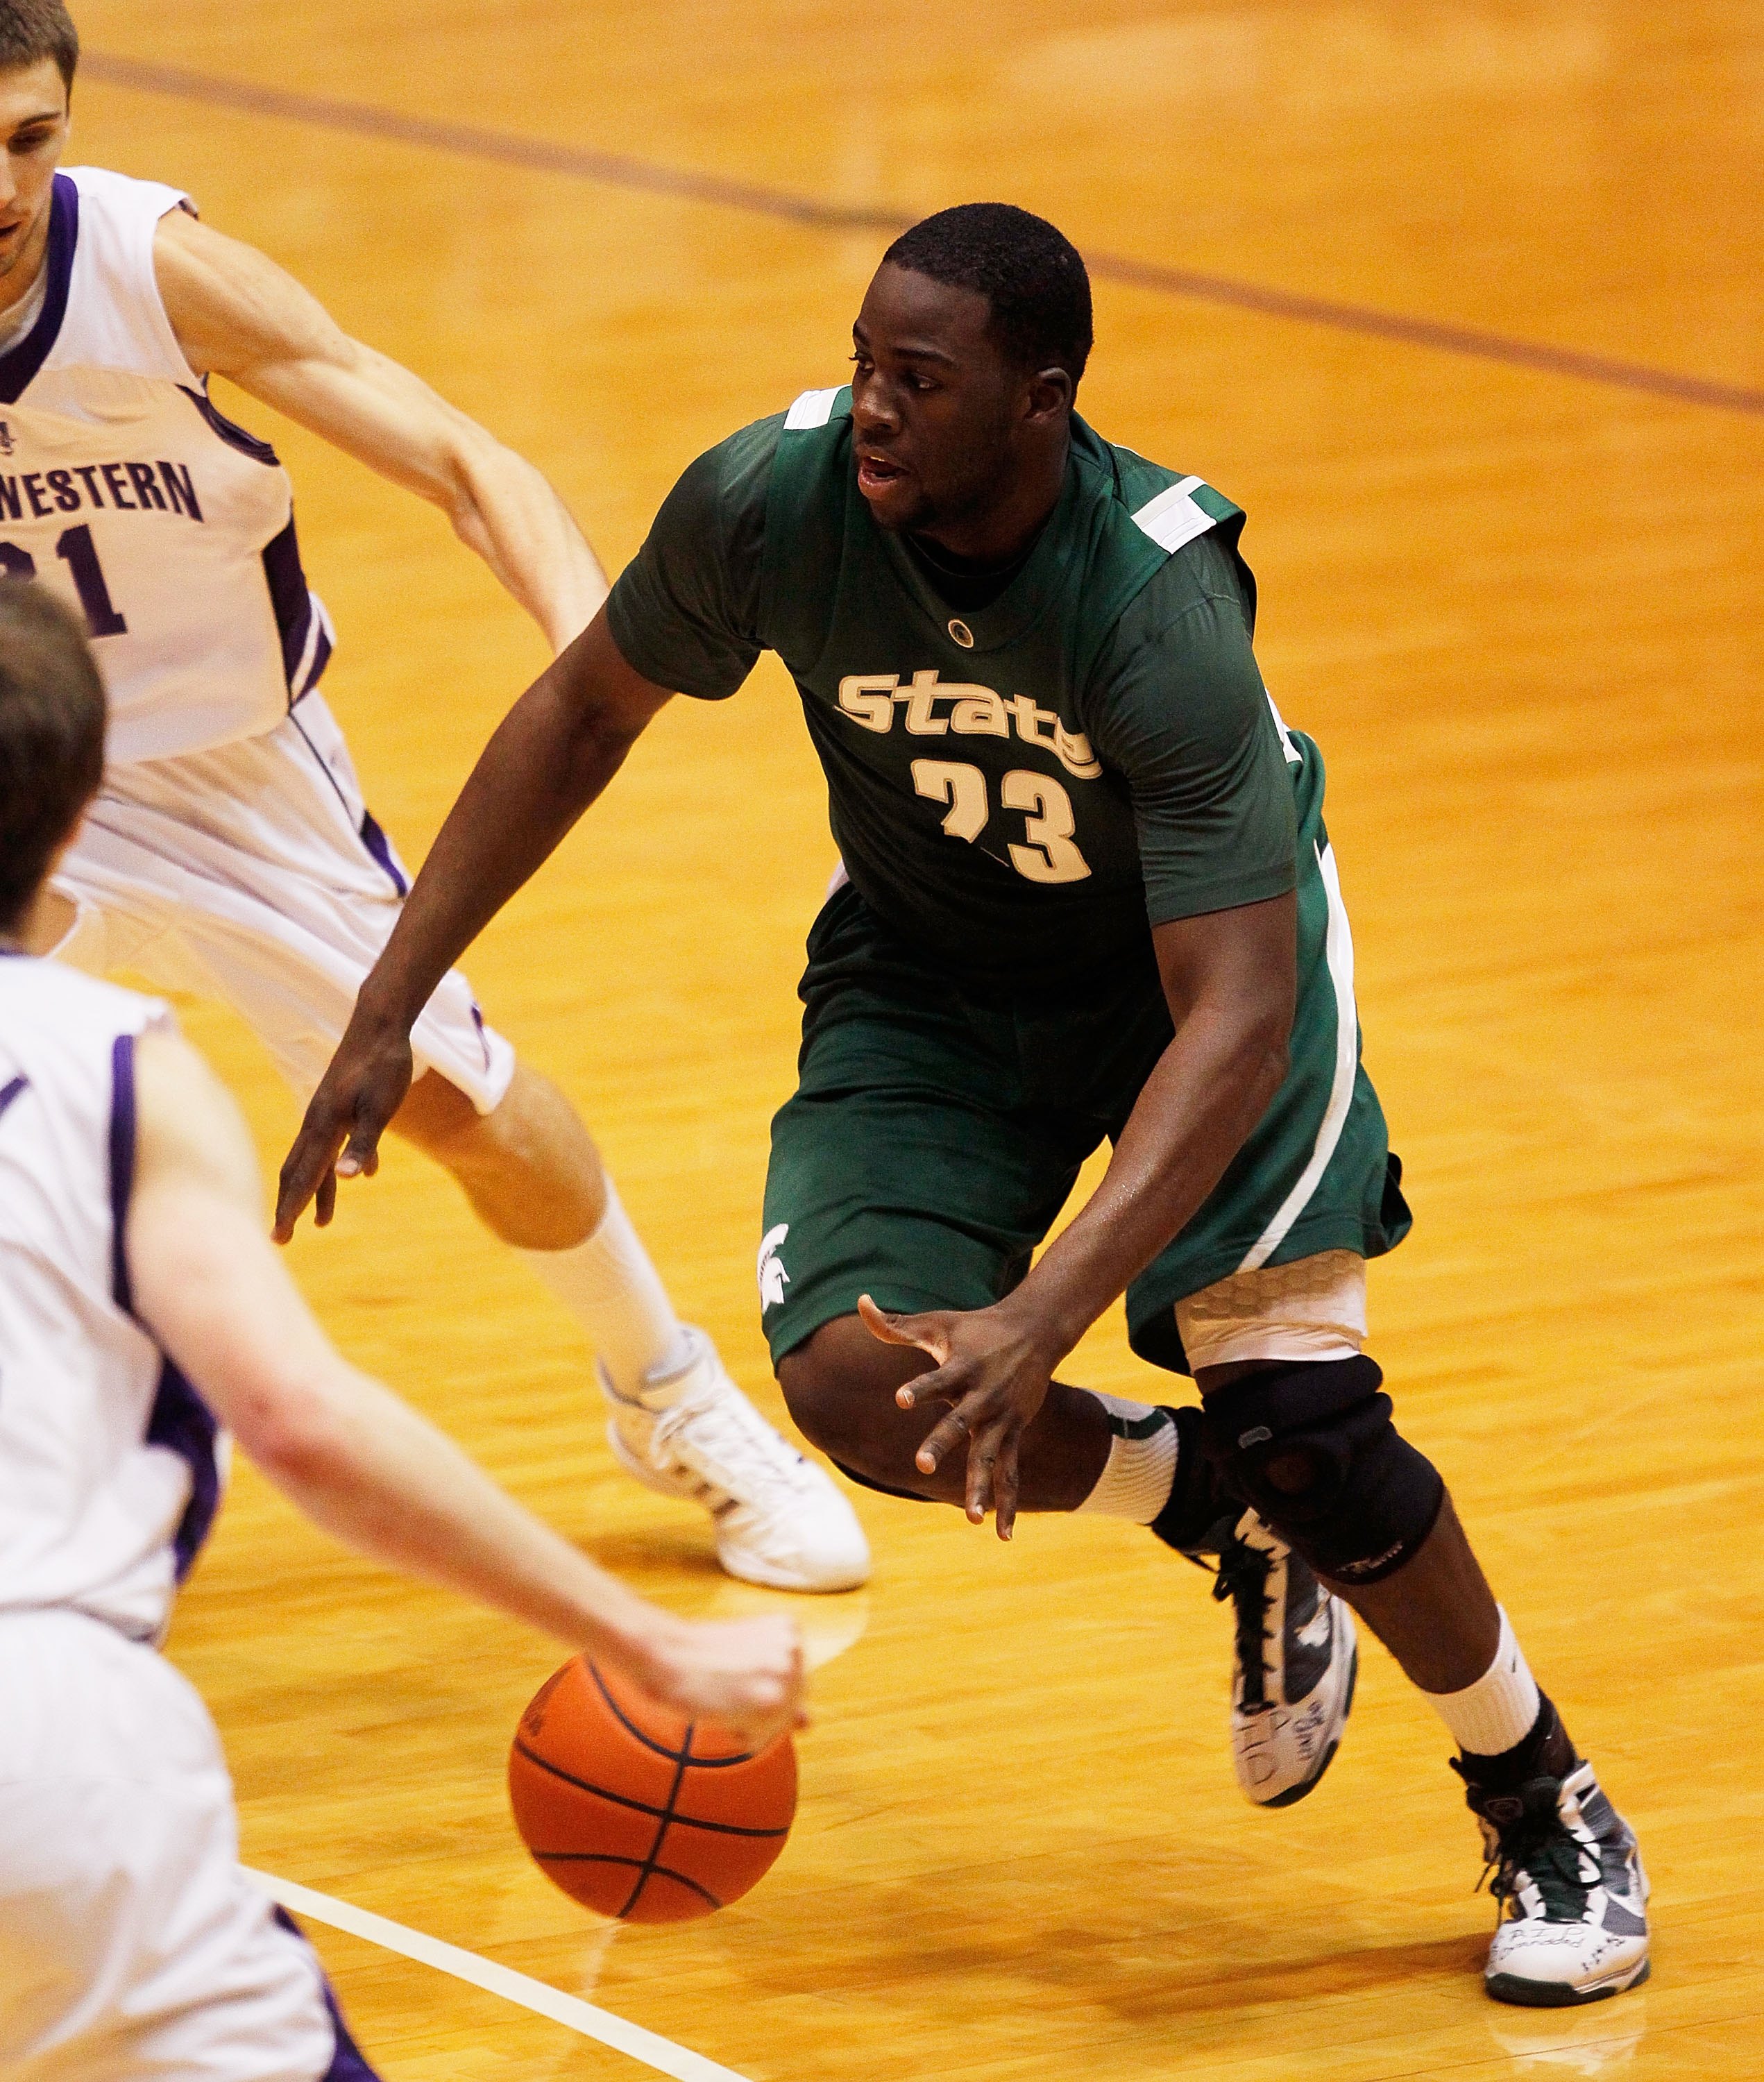 EVANSTON, IL - JANUARY 02: Draymond Green #23 of the Michigan State Spartans moves against the Northwestern Wildcats on January 2, 2010 at Welsh-Ryan Arena in Evanston, Illinois. Michigan State defeated Northwestern 91-70. (Photo by Jonathan Daniel/Getty